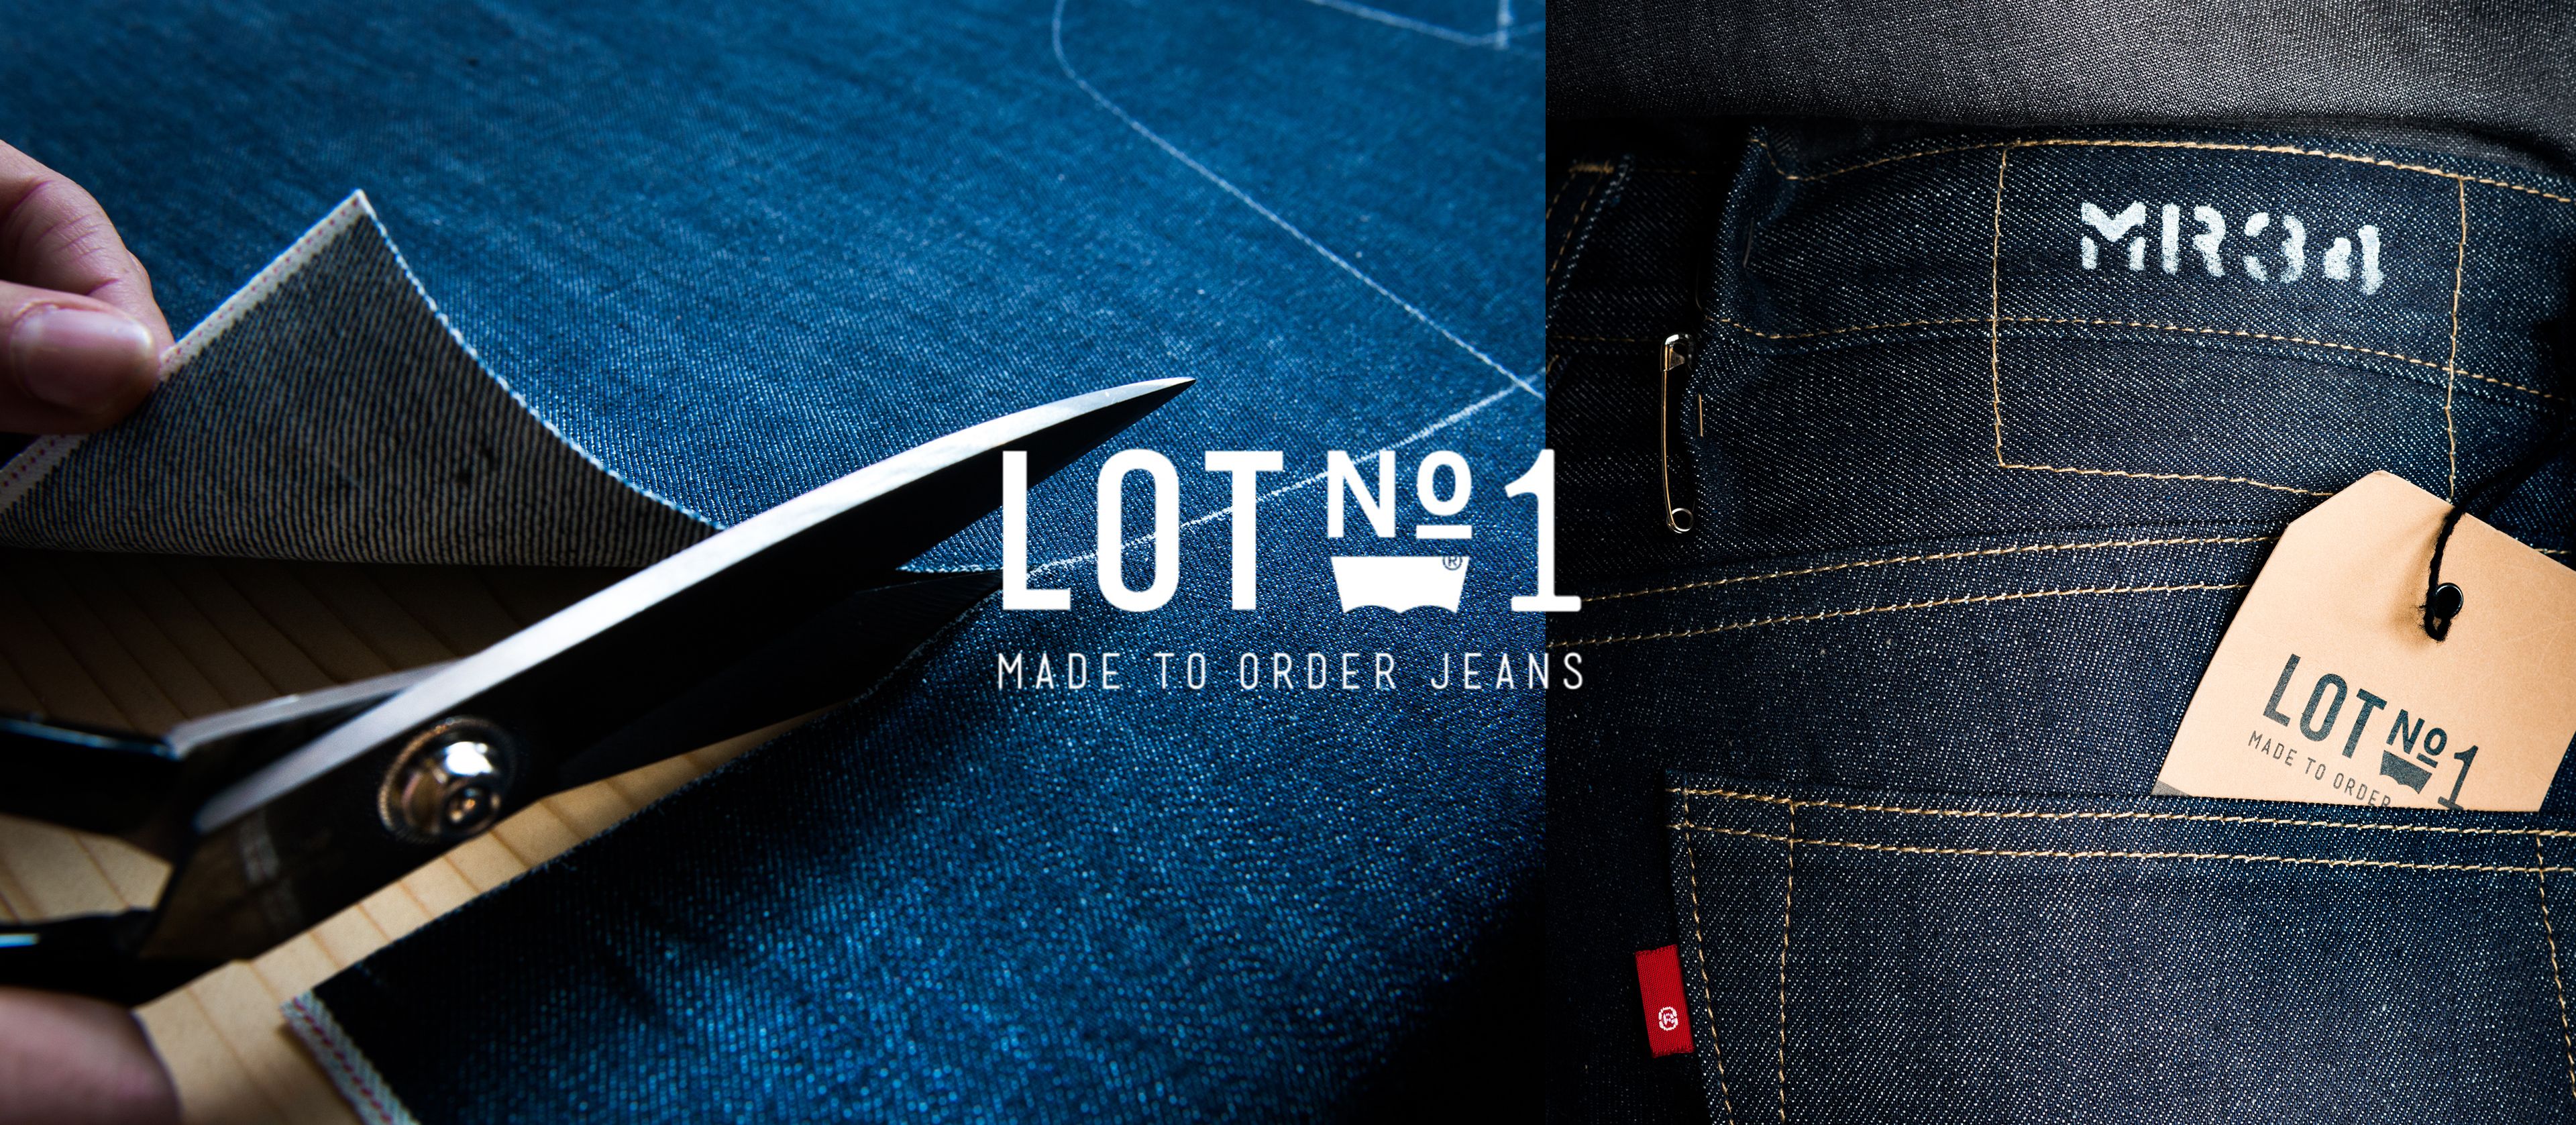 levi's made to order